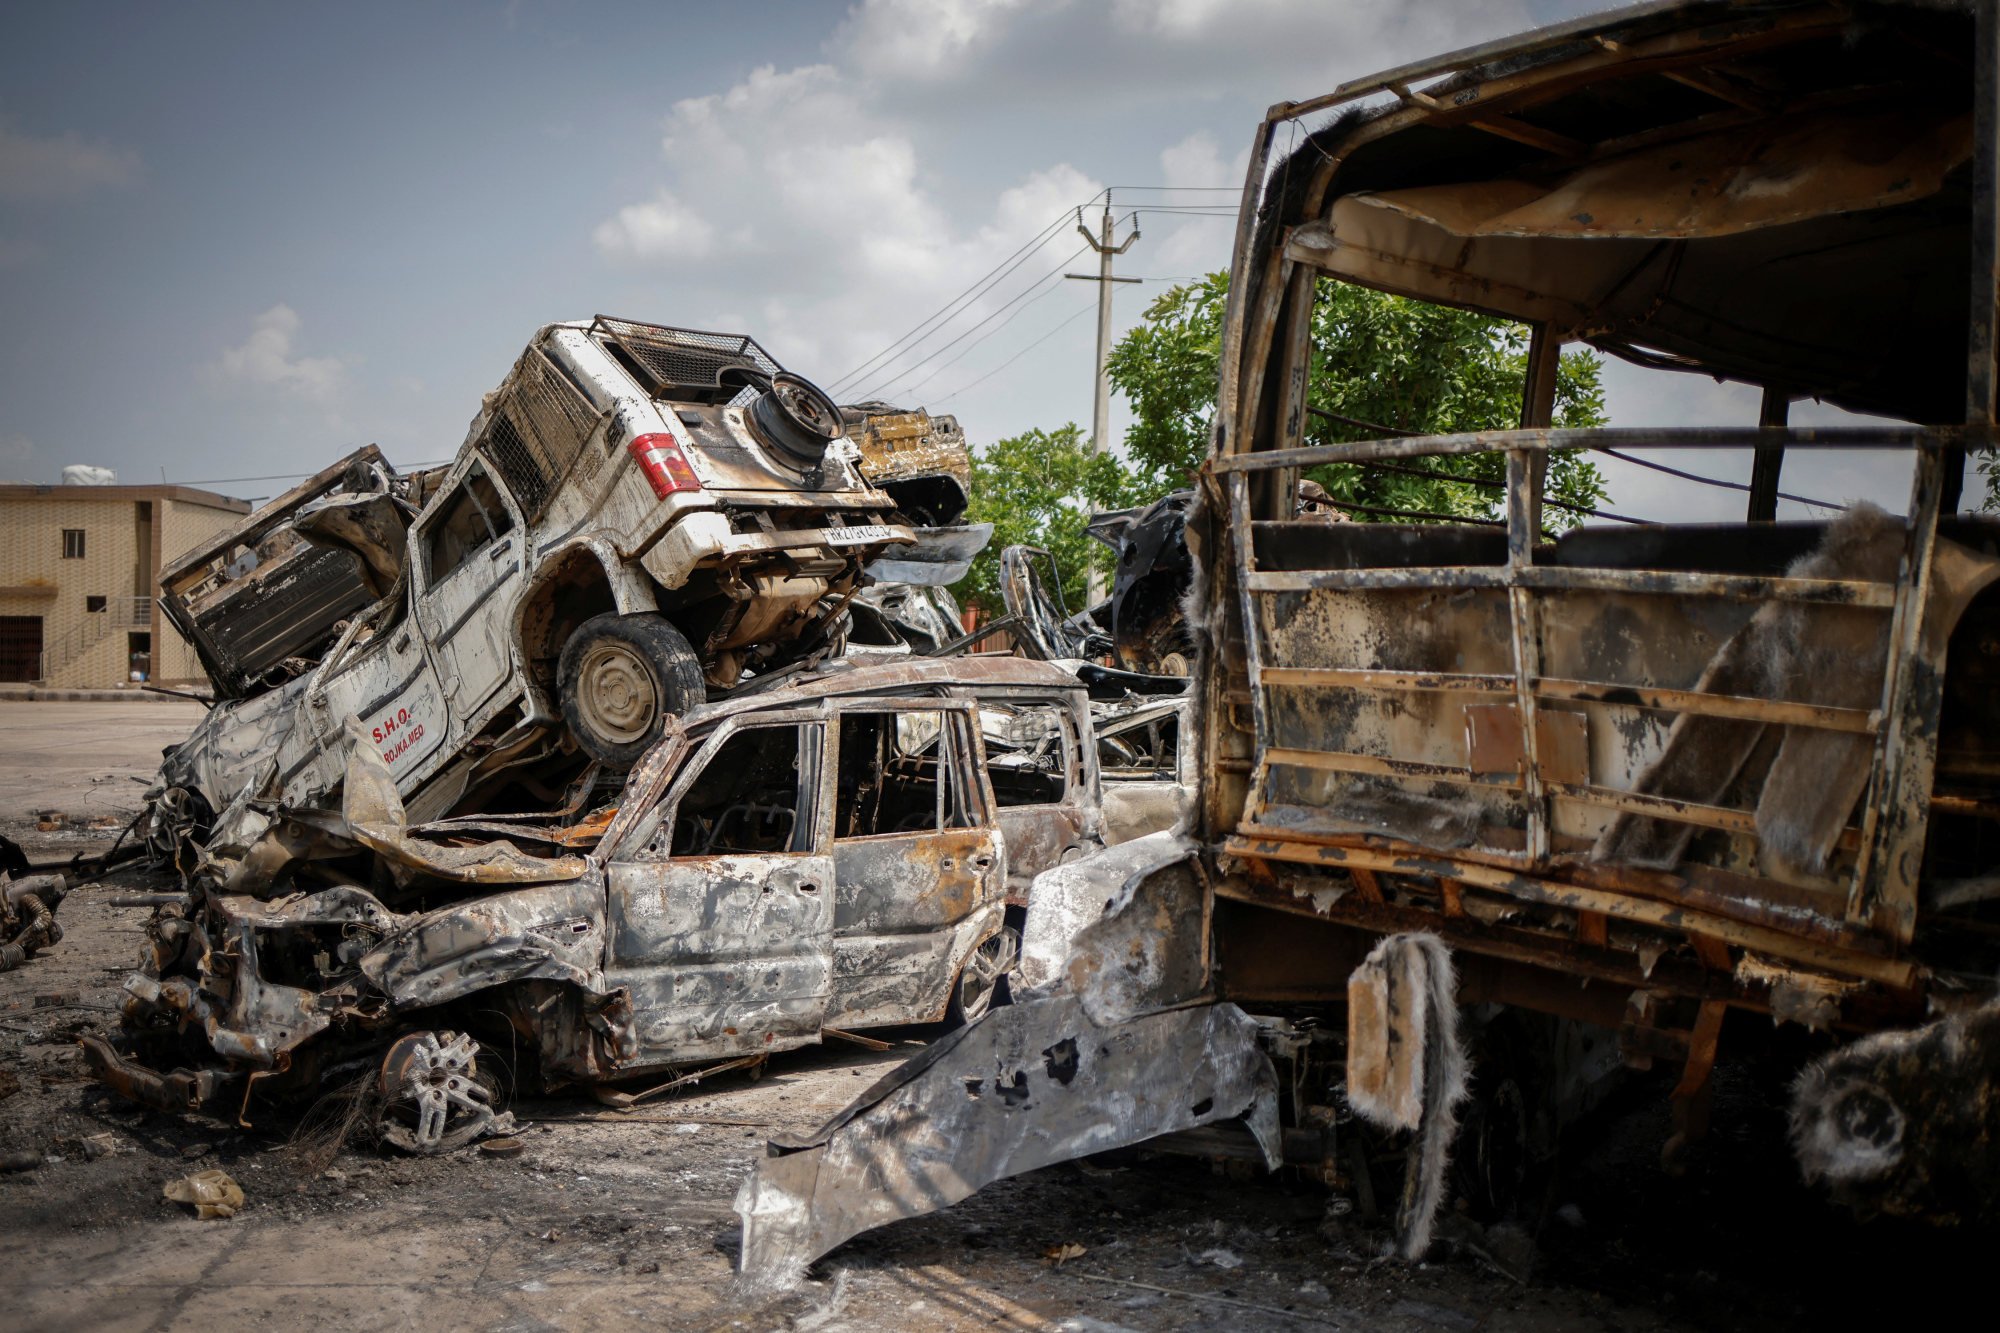 Burnt-out vehicles are seen in Haryana’s Nuh district this month following communal clashes between Hindus and Muslims. Photo: Reuters